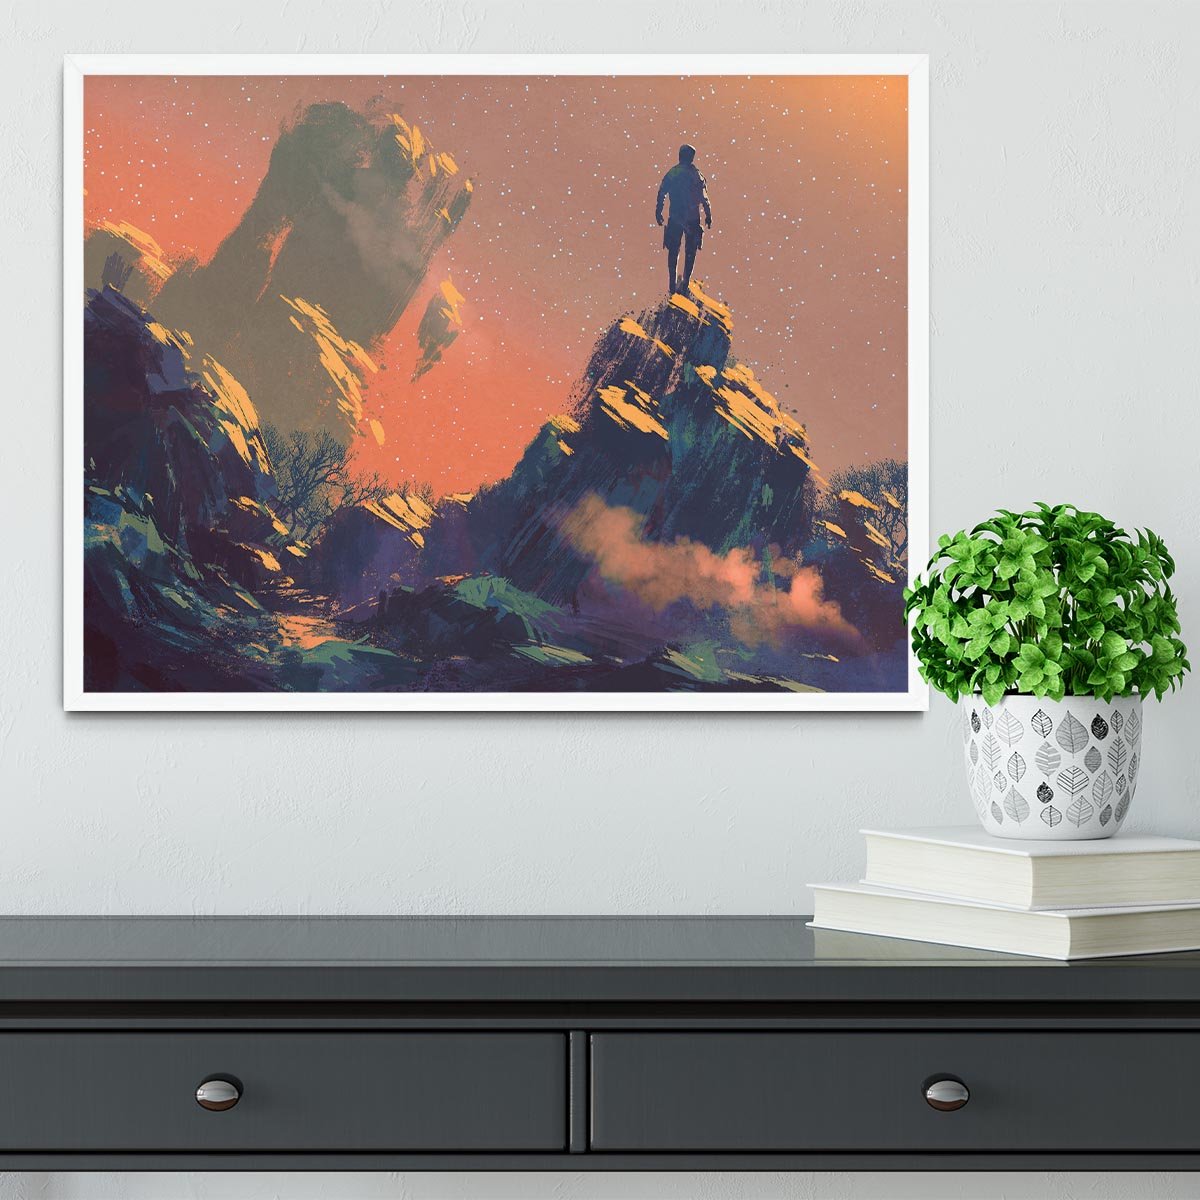 Top of the hill watching the stars Framed Print - Canvas Art Rocks -6